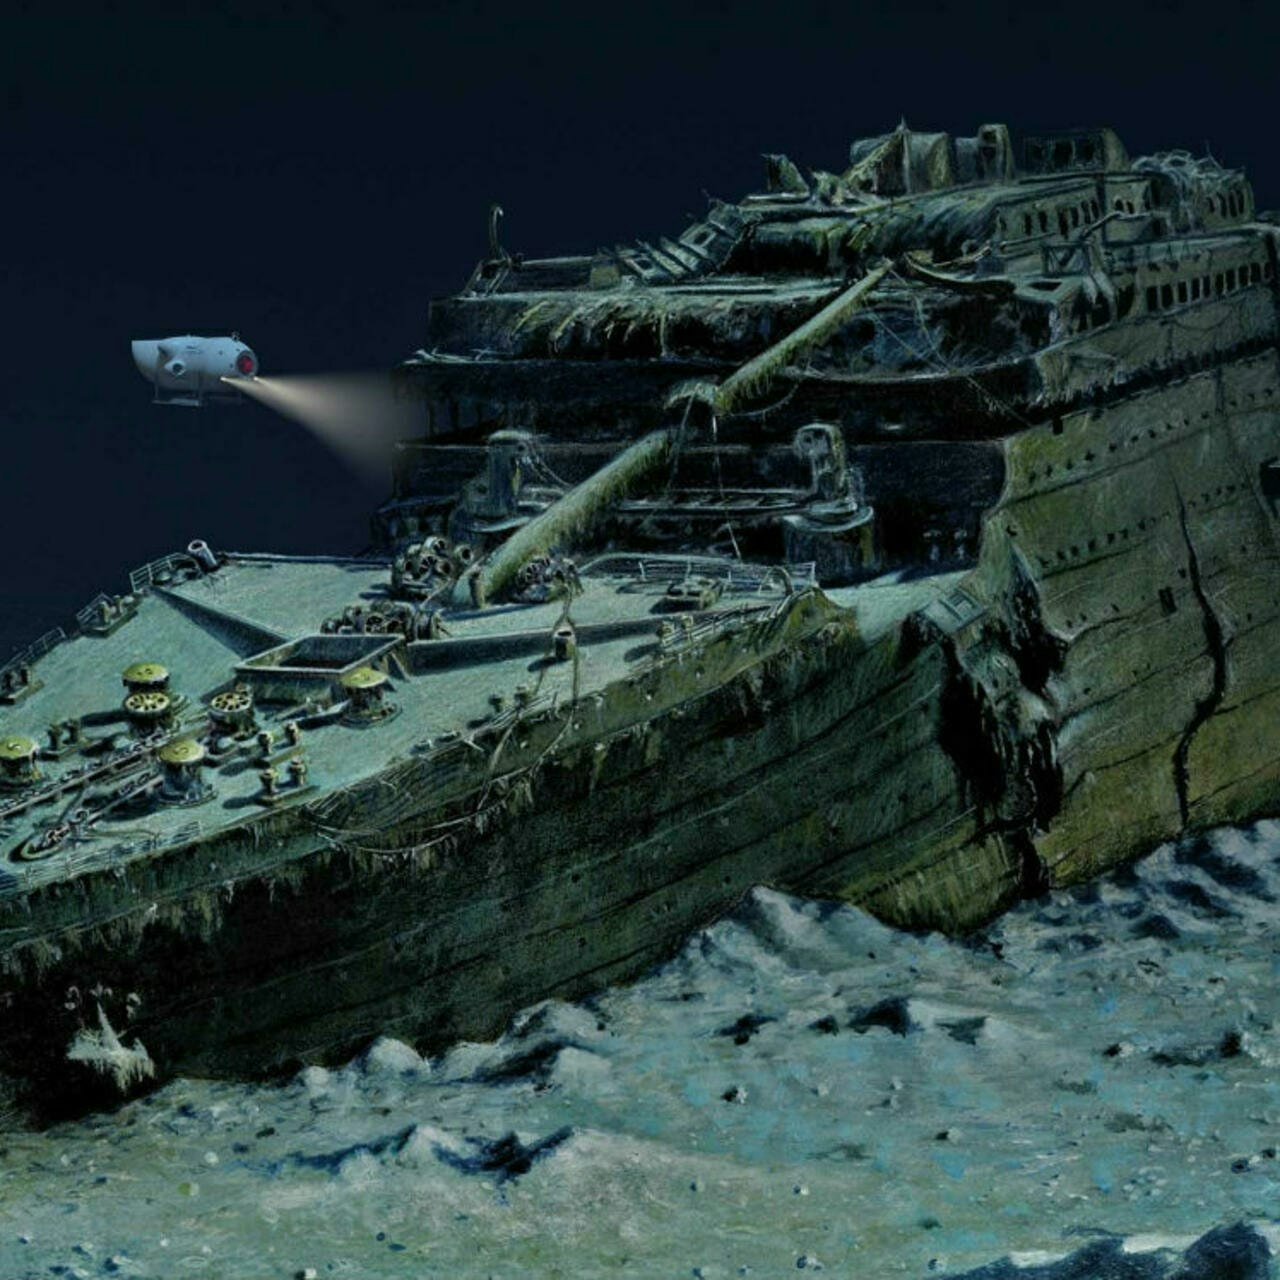 The wreck of the Titanic was finally discovered on September 1, 1985